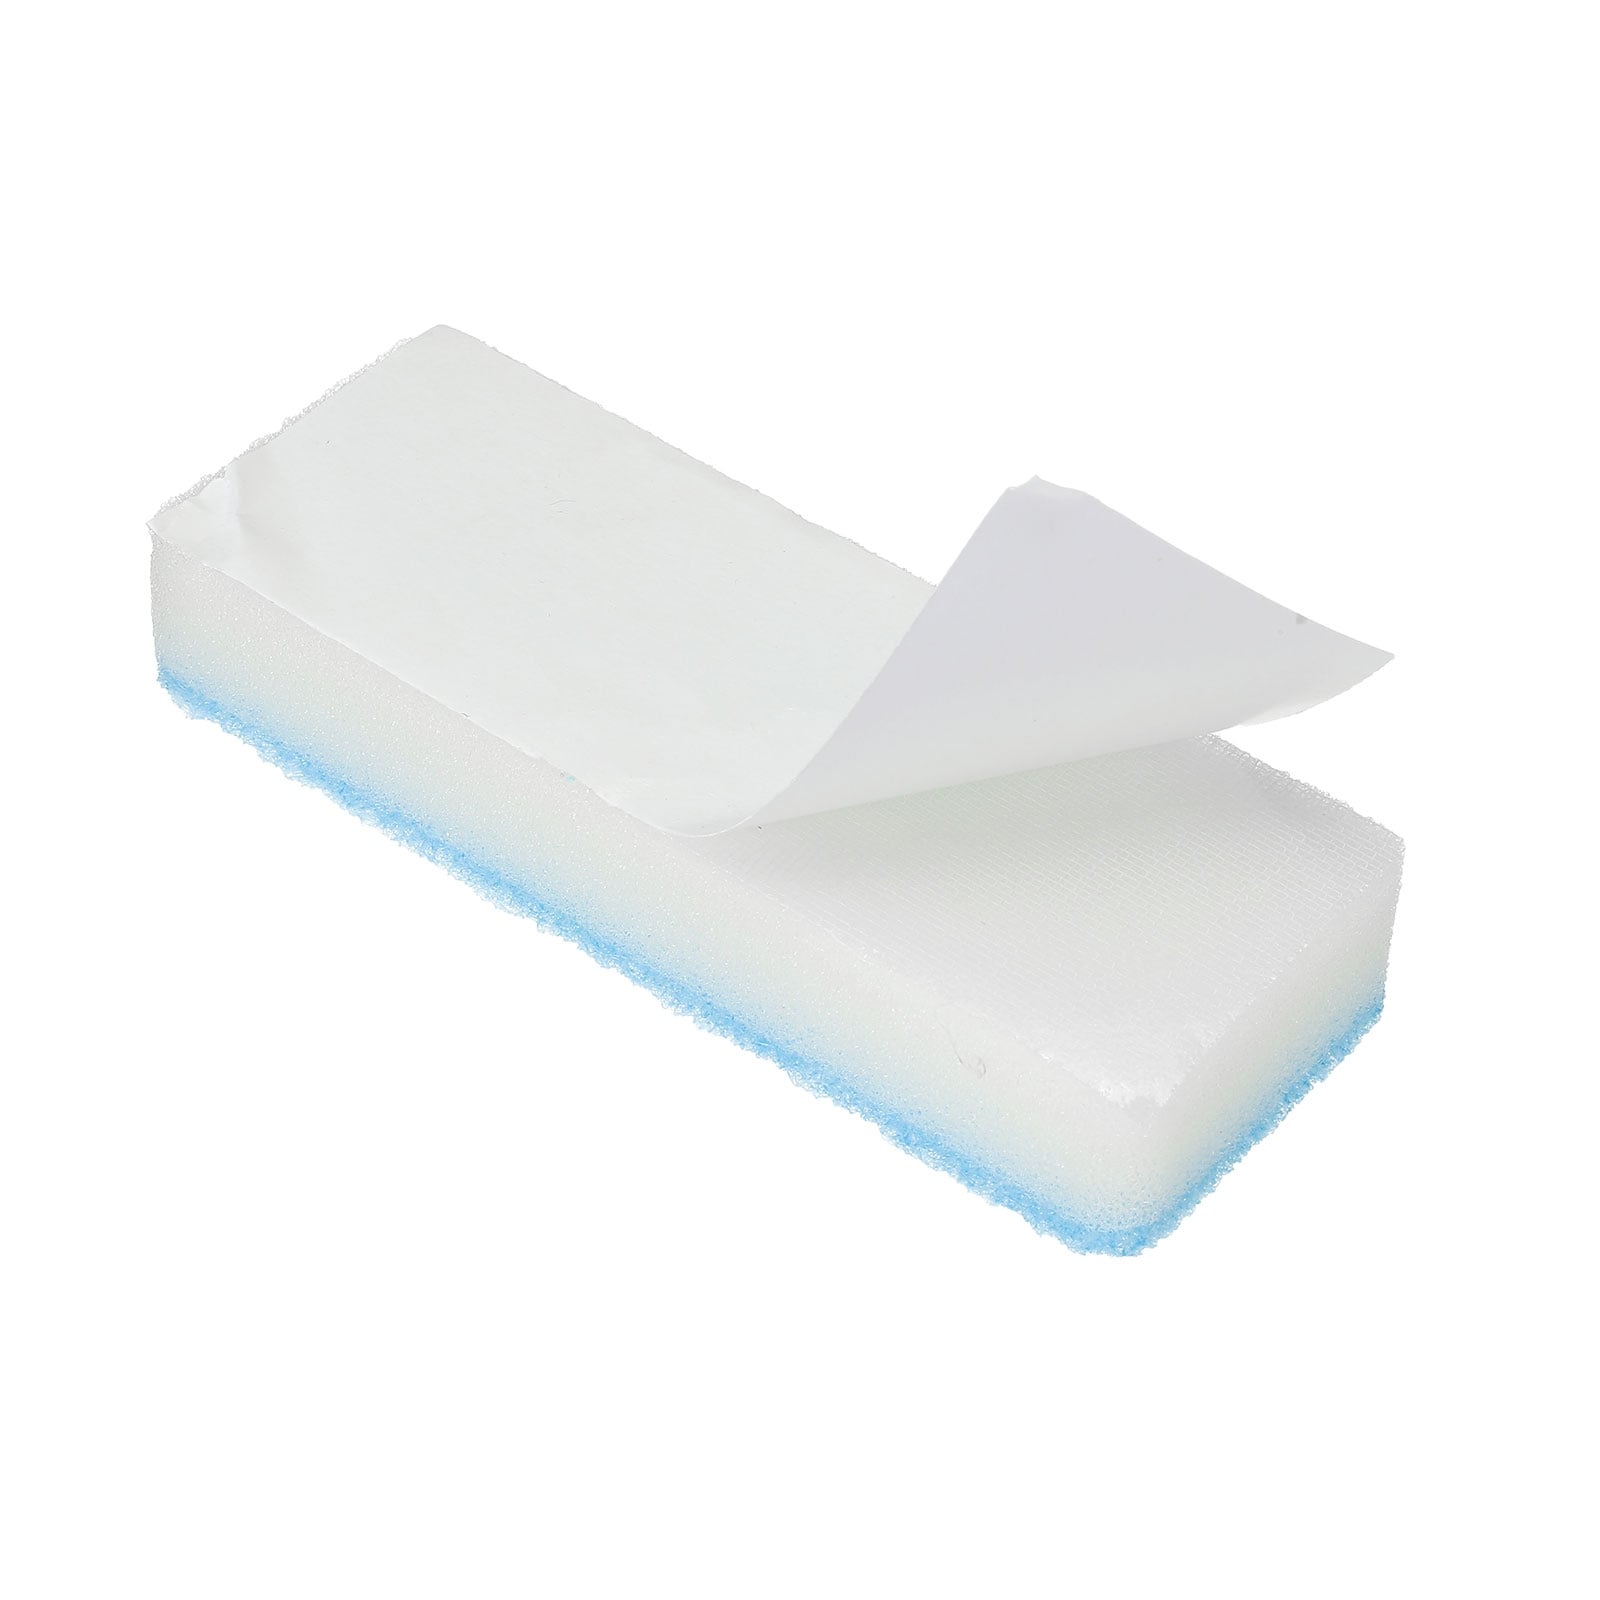 https://ak1.ostkcdn.com/images/products/is/images/direct/2a5ae5d65c7e70bca2f9386dc4ab36ee8d97b8e9/Shower-Squeegee-Cleaning-Kit-with-Sponge-%26-2-Extra-Replacement-Head-Pink-Handle.jpg